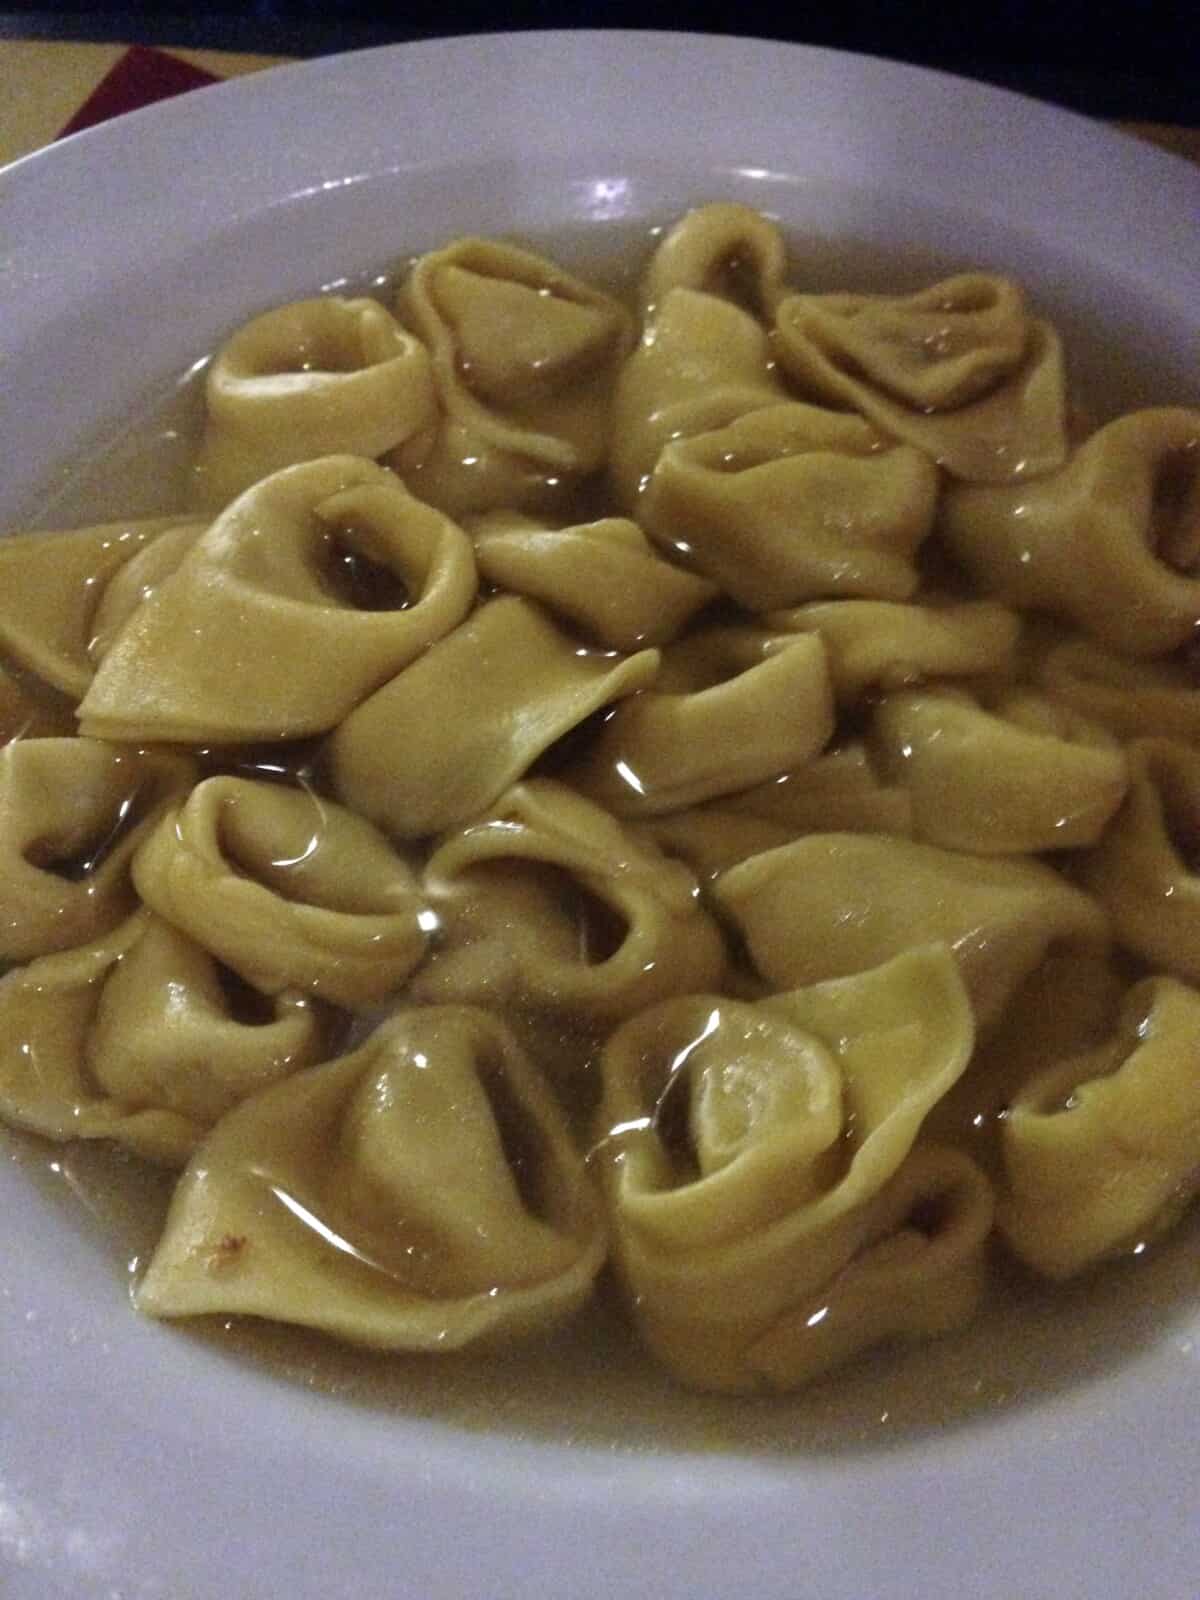 Traditional Tortellini in brodo from a restaurant in Emilia Romagna Italy